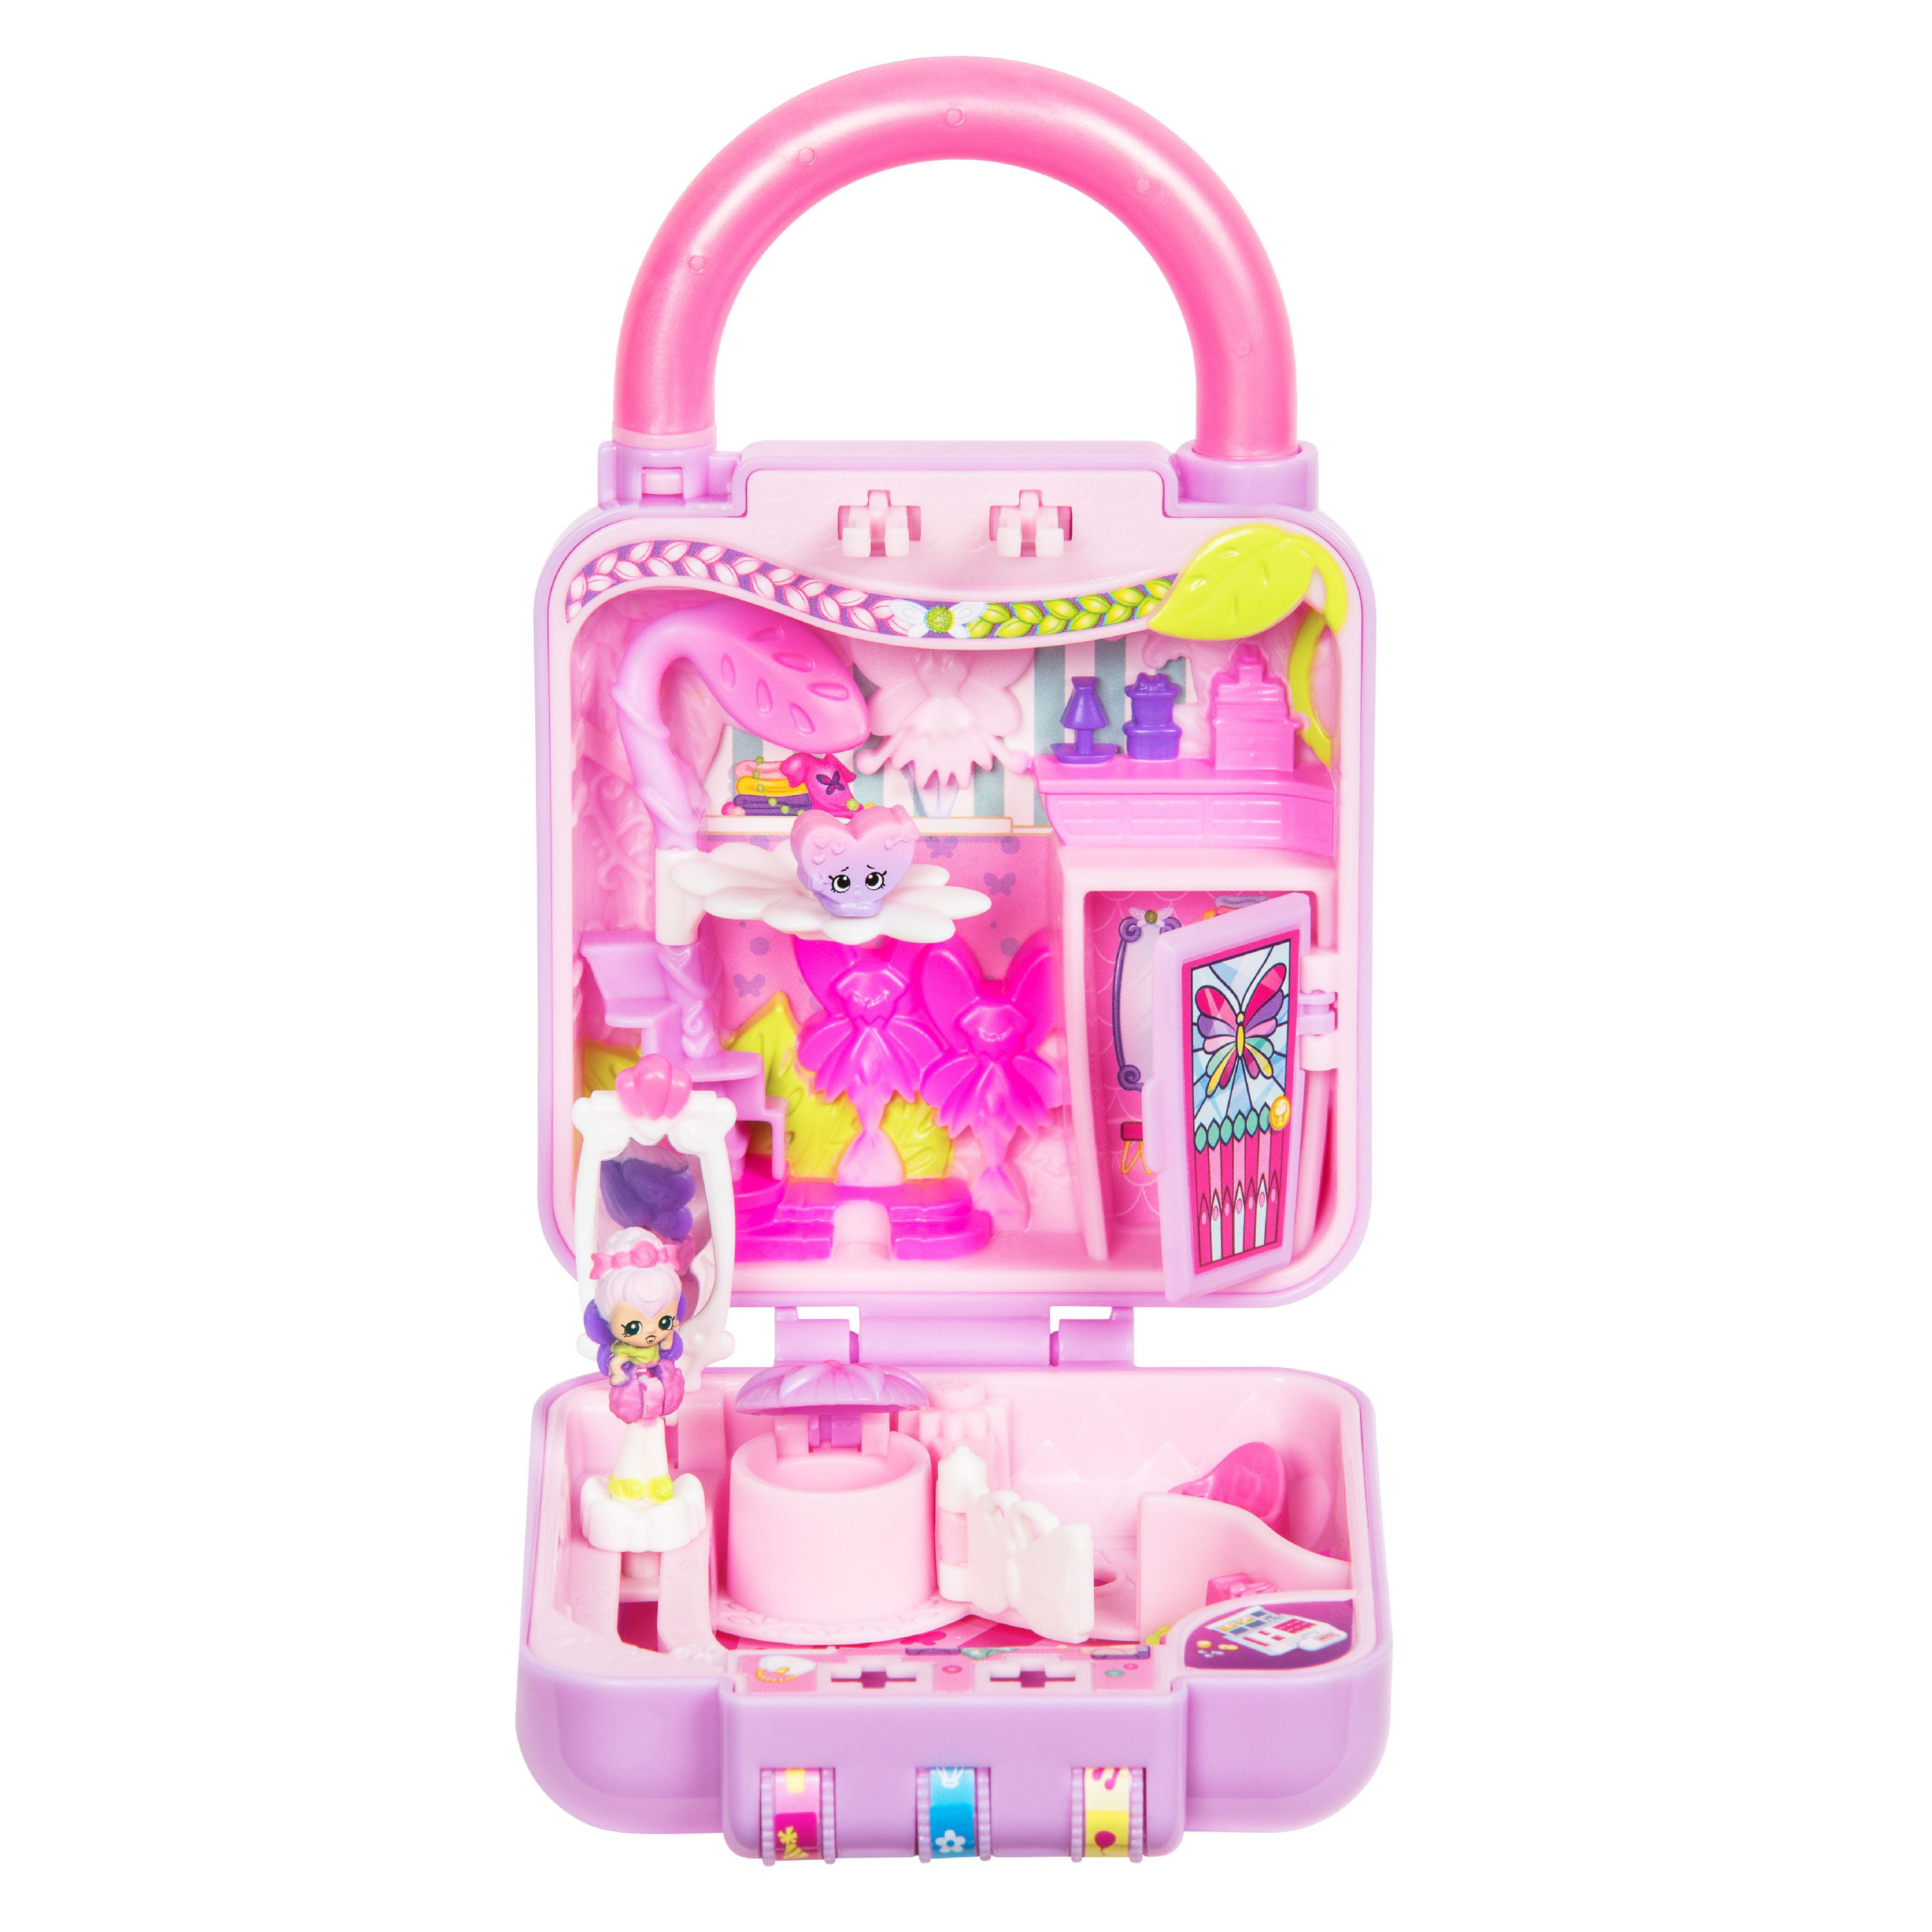 Shopkins, Toys, Shopkins Carry Case With Shopkins Included That Are Shown  Some Squinkies